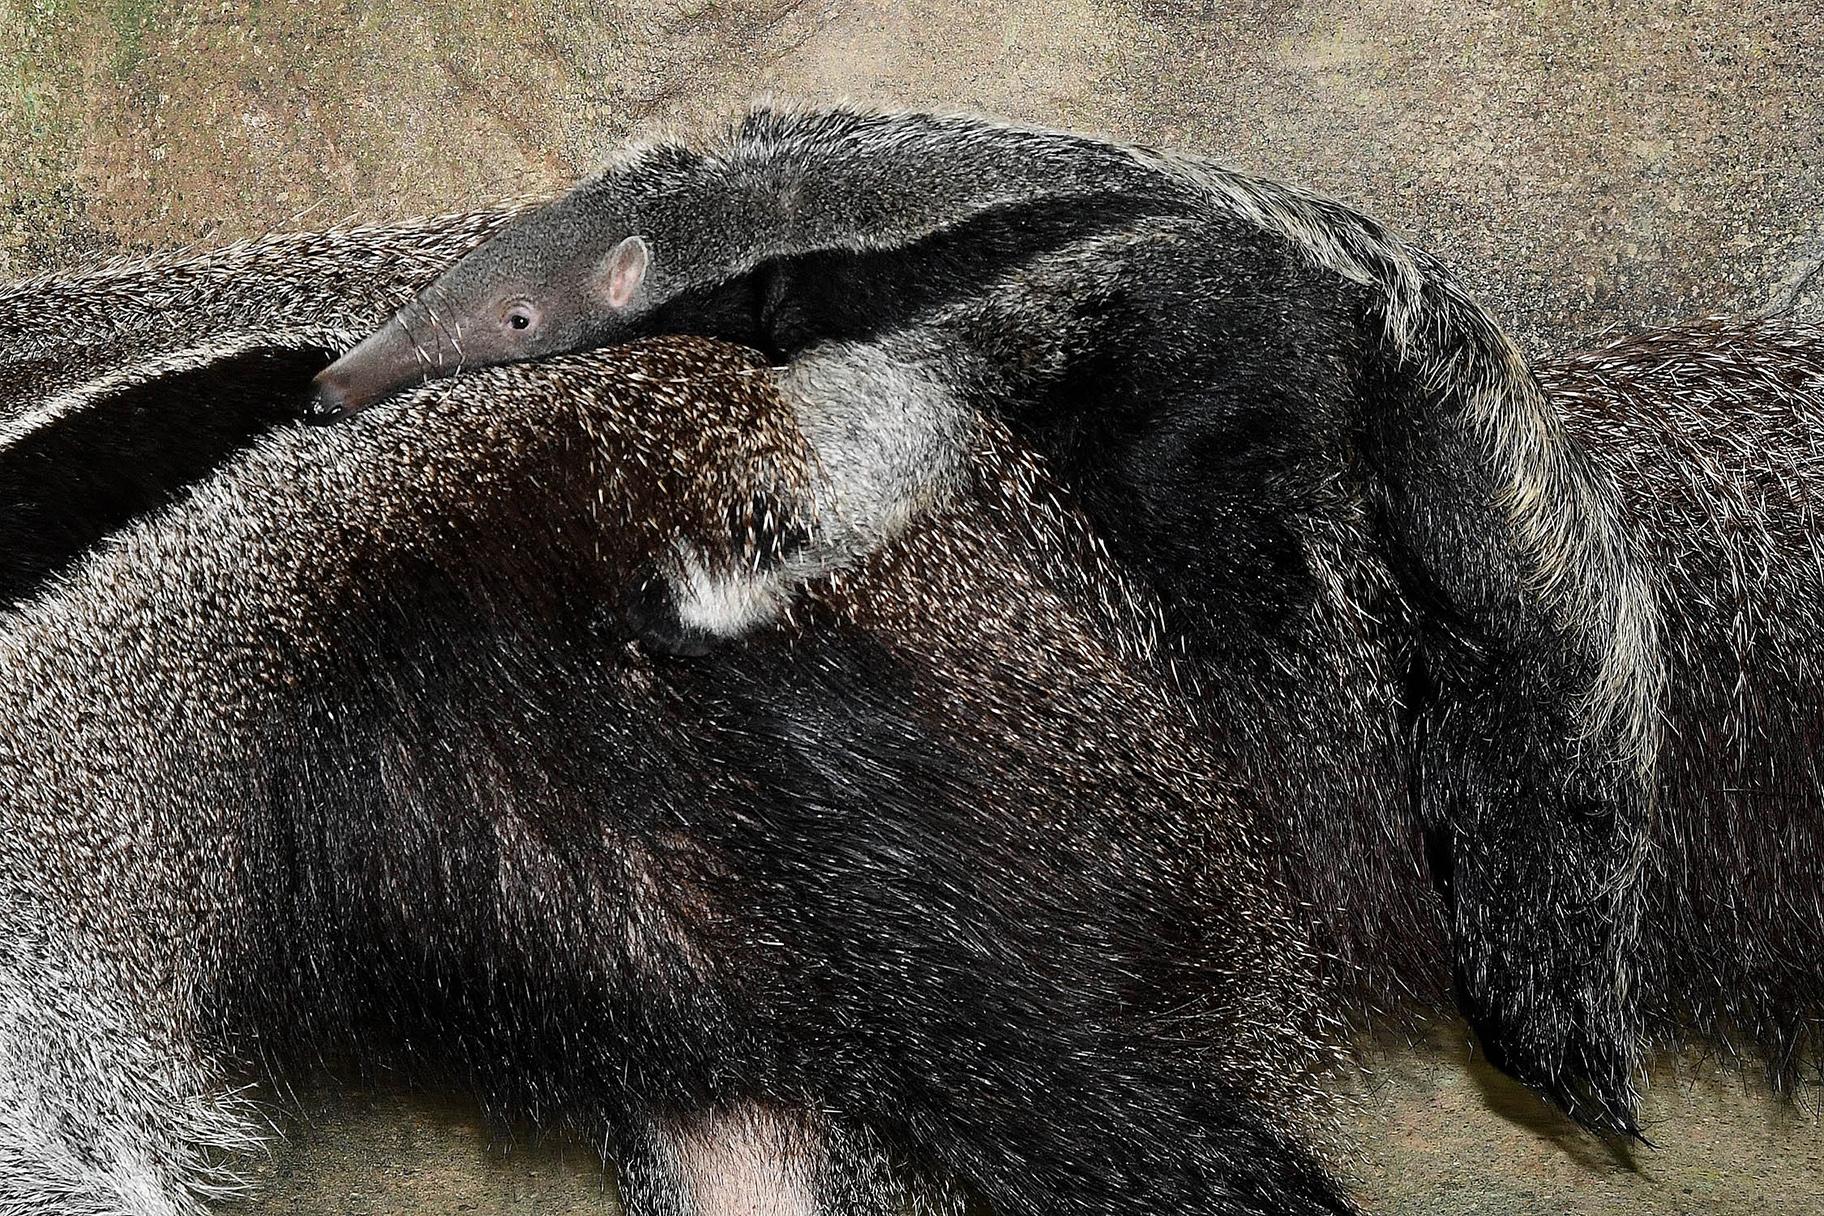 Giant Anteater Pup Born at Brookfield Zoo | Chicago News | WTTW